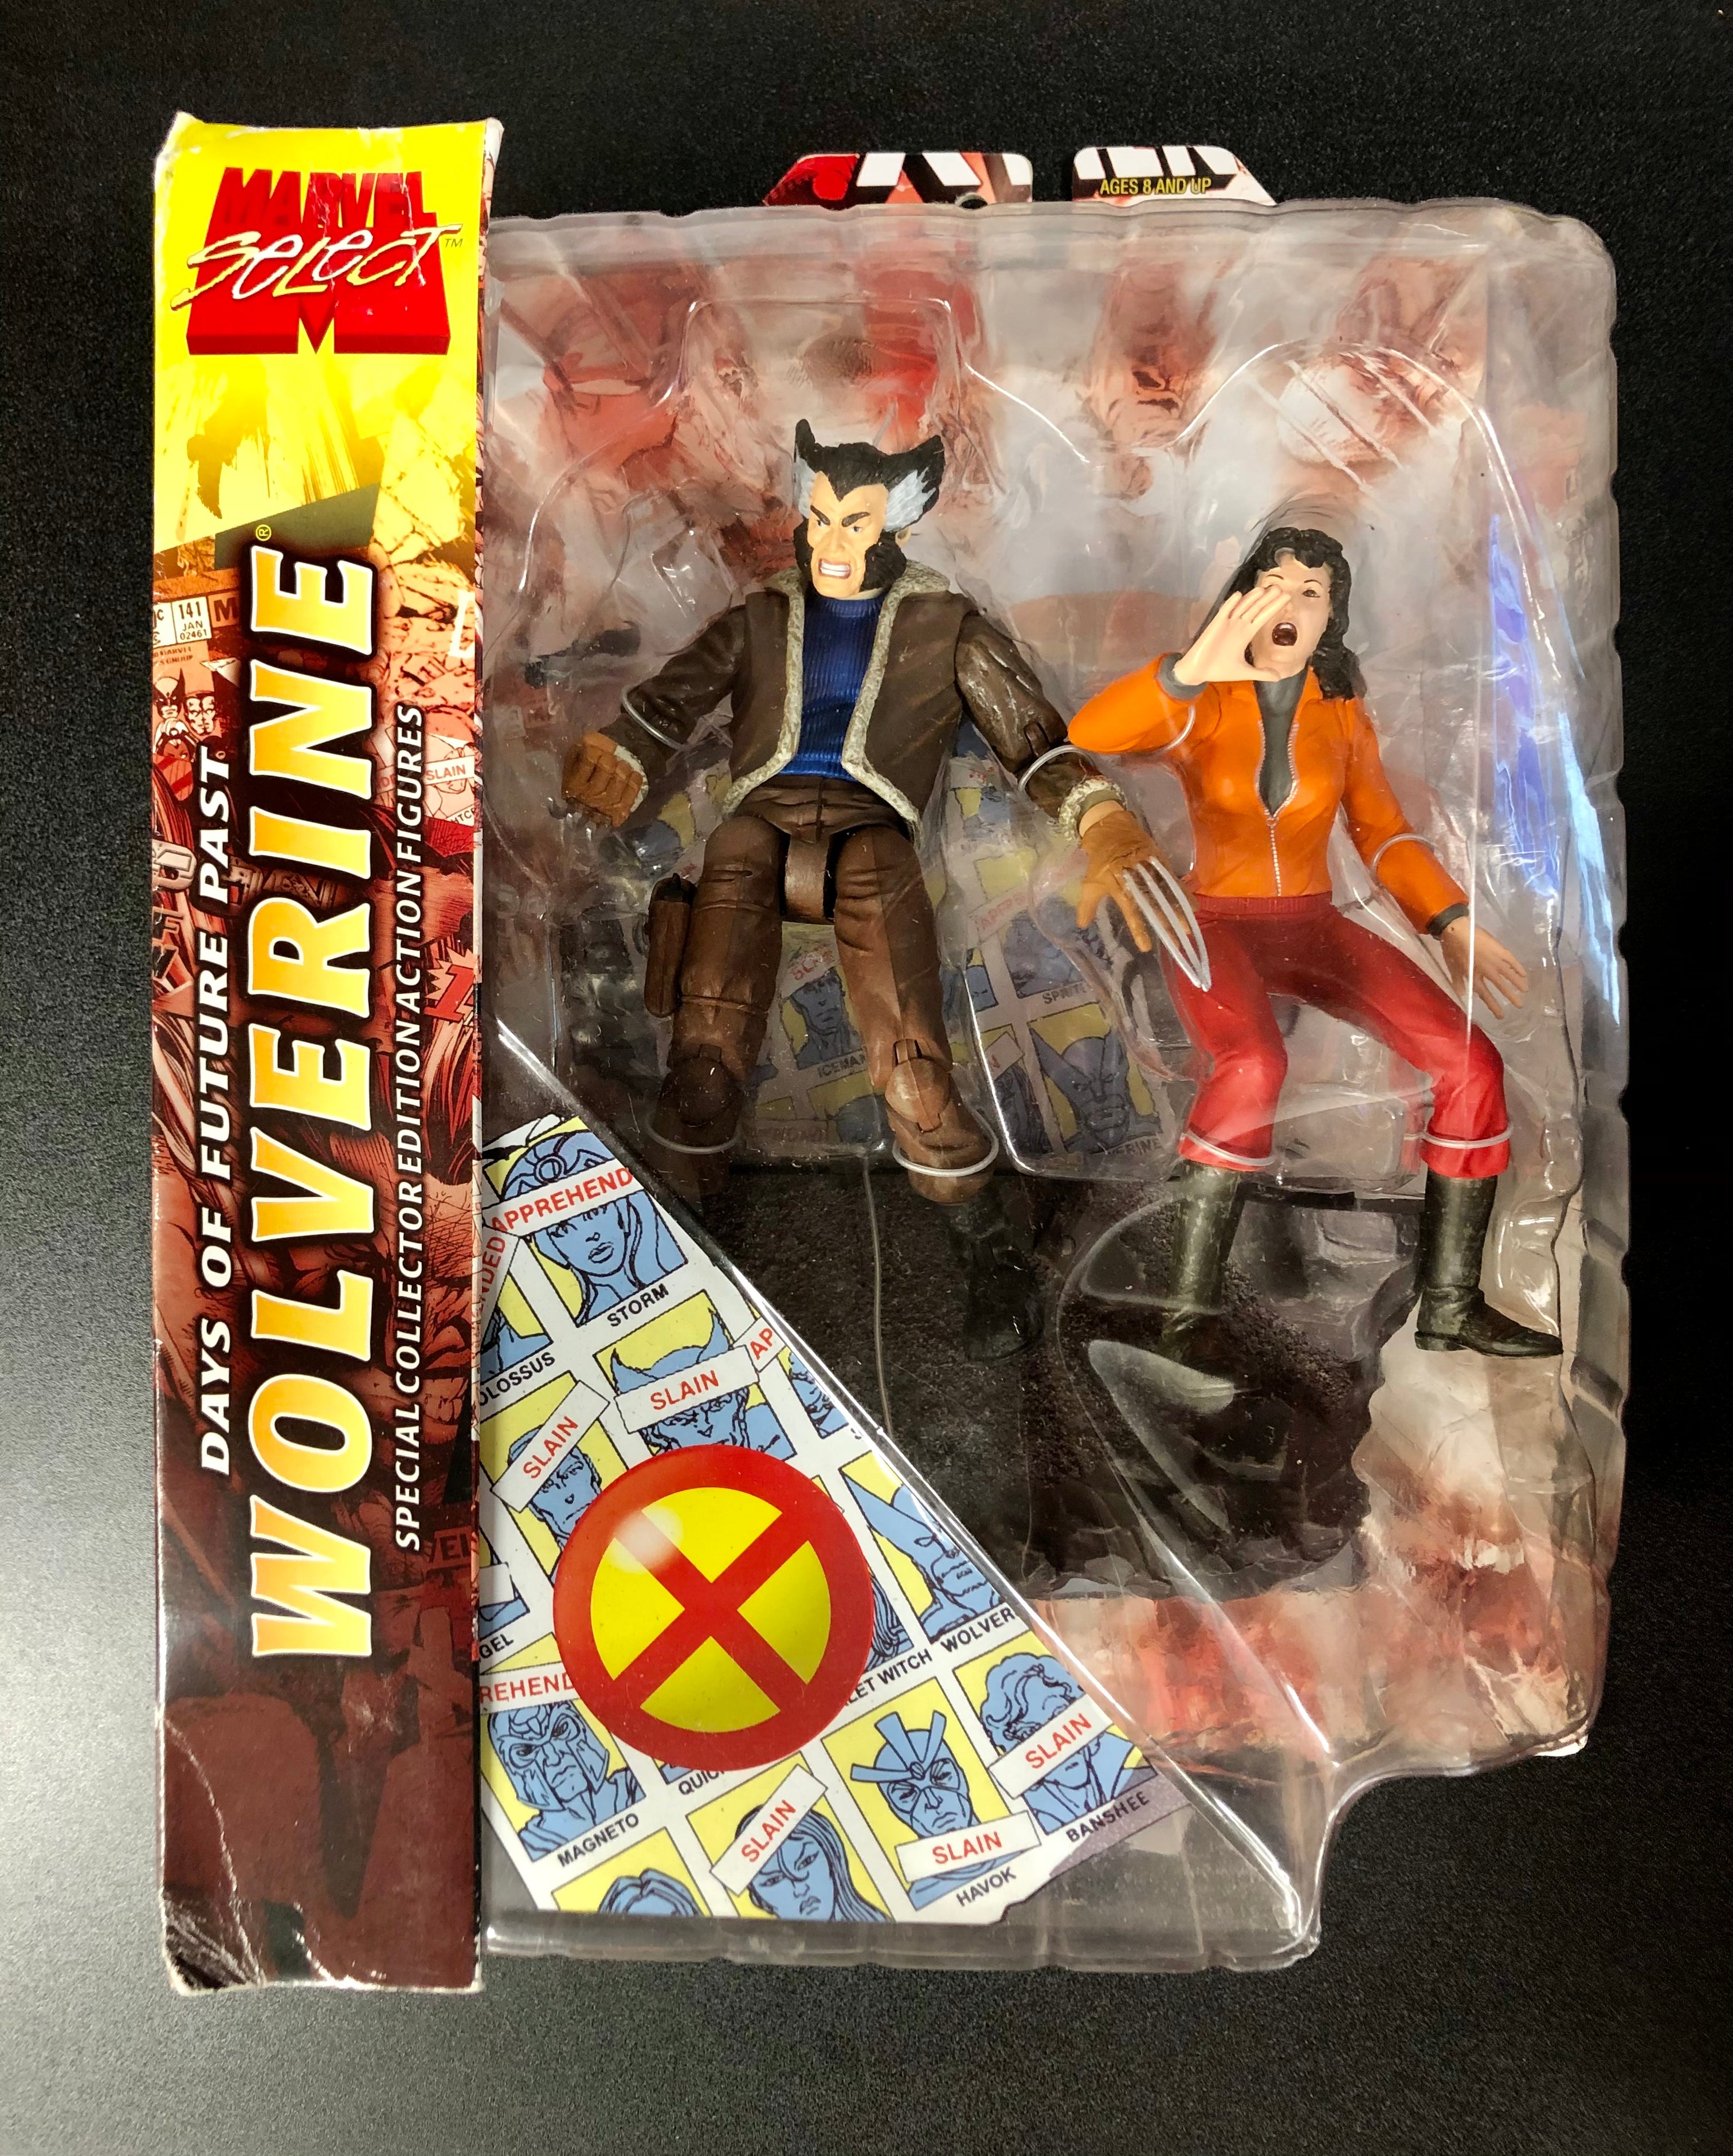 Diamond Select Marvel Select Days of Future Past Wolverine Action